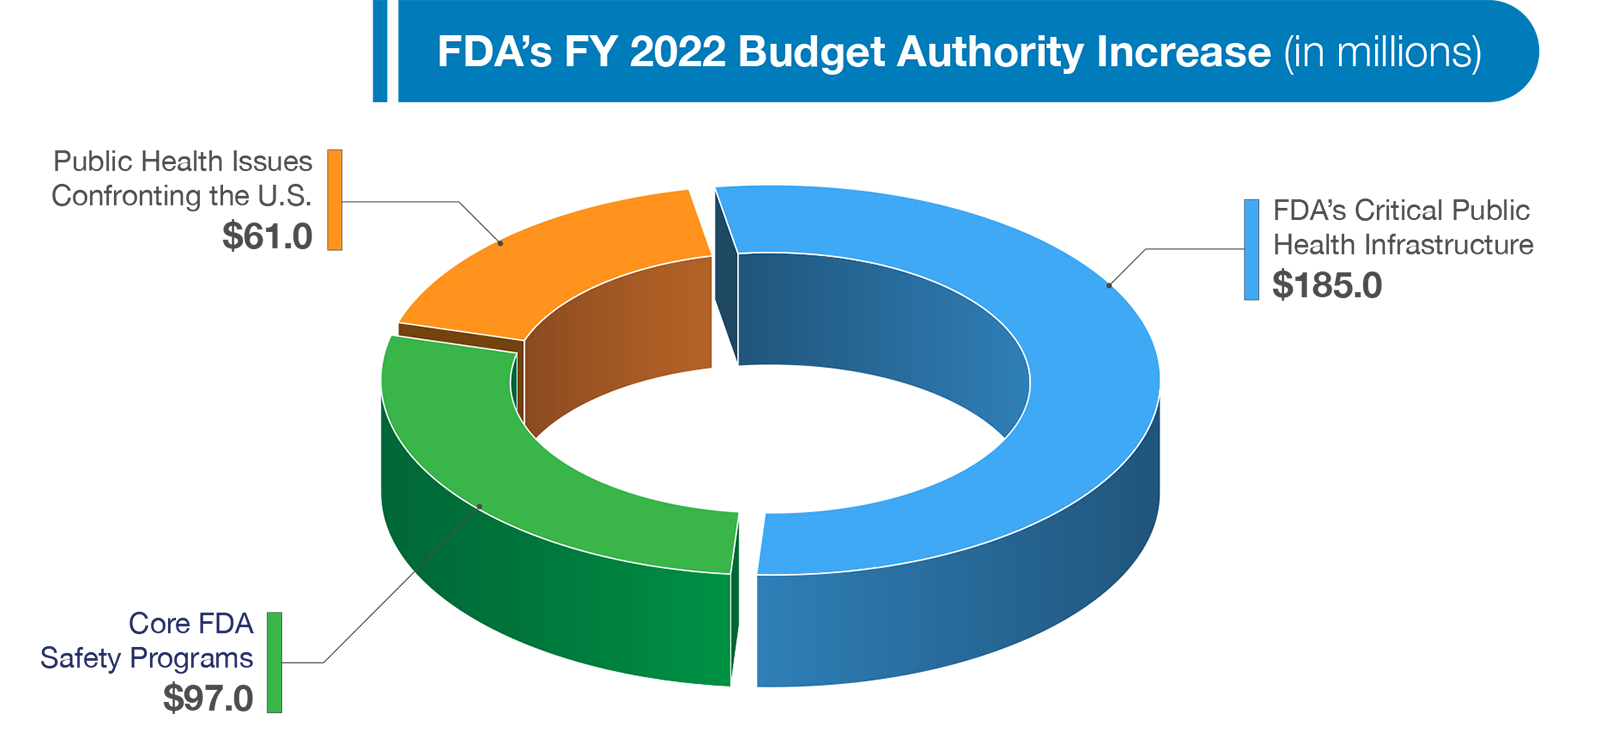 Pie chart of FDA’s FY 2022 budget authority increase with FDA’s Critical Public Health Infrastructure at $185.0 million, Core FDA Safety Programs at $97.0 million, and Public Health Issues Confronting the U.S. at $61.0 million.